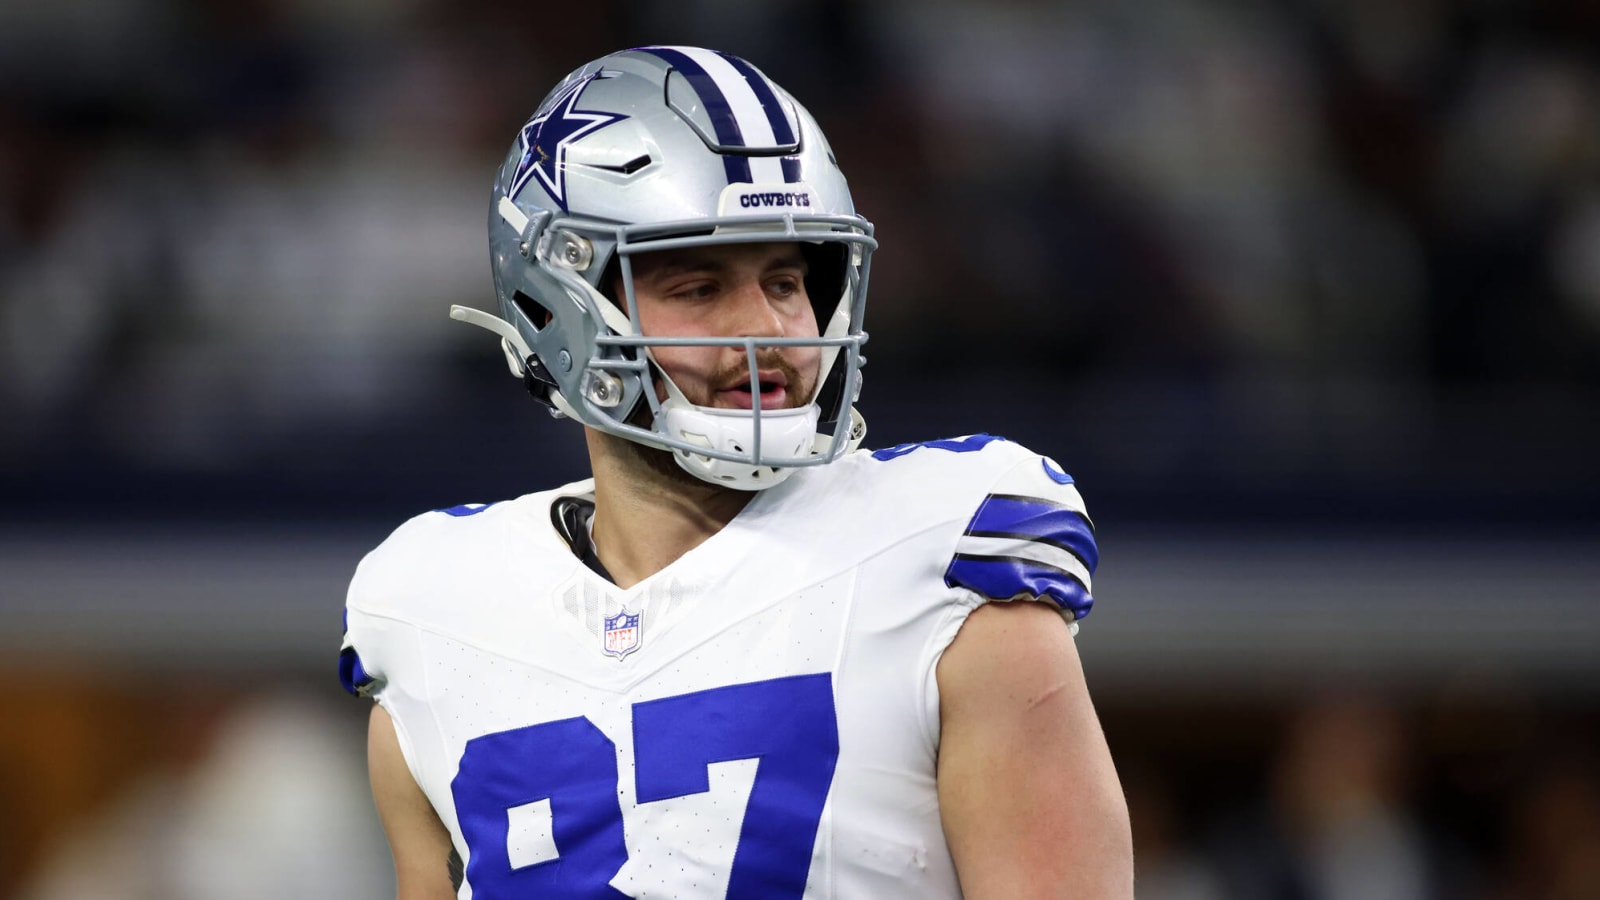 Cowboys’ Offensive Star Gets Brutally Honest On Playoff Loss